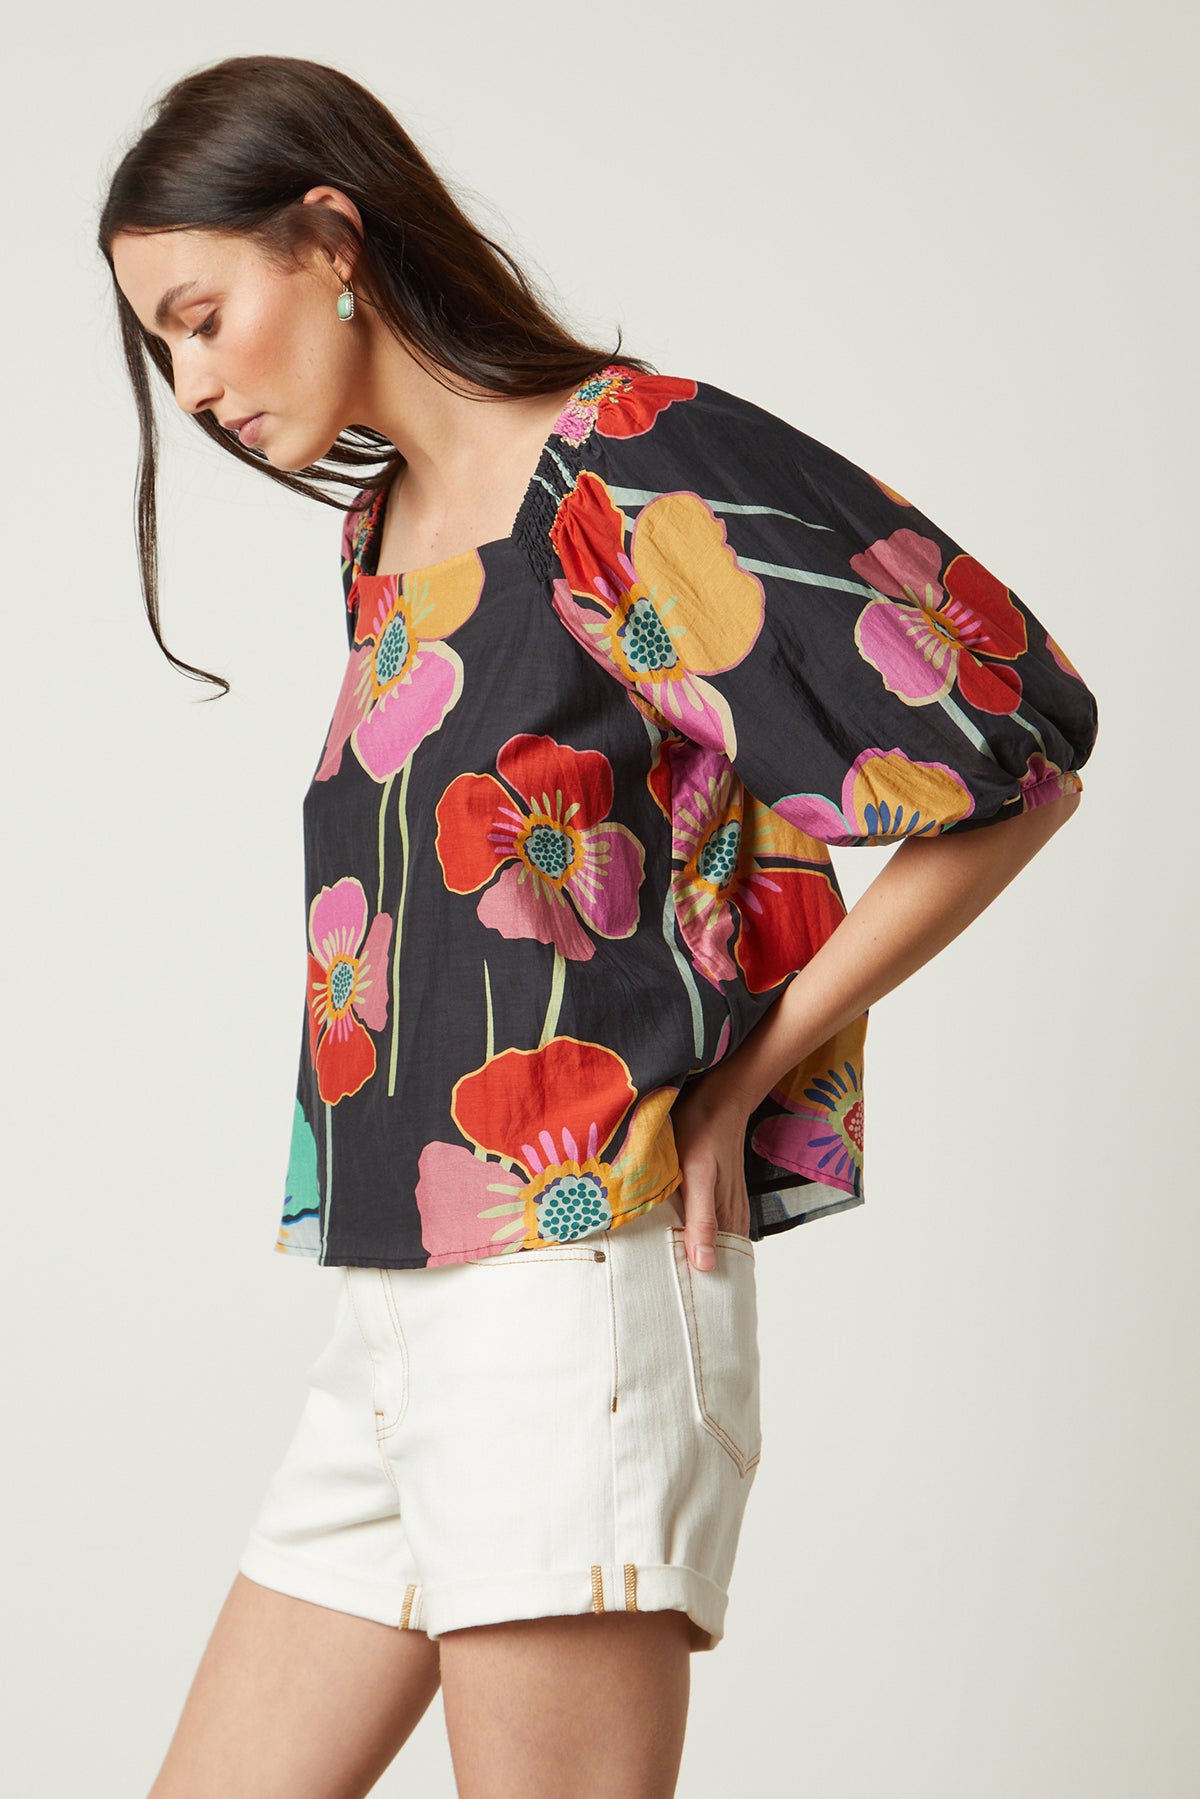 Jasmine Top in bold floral with black background and white denim shorts side-26143149719745